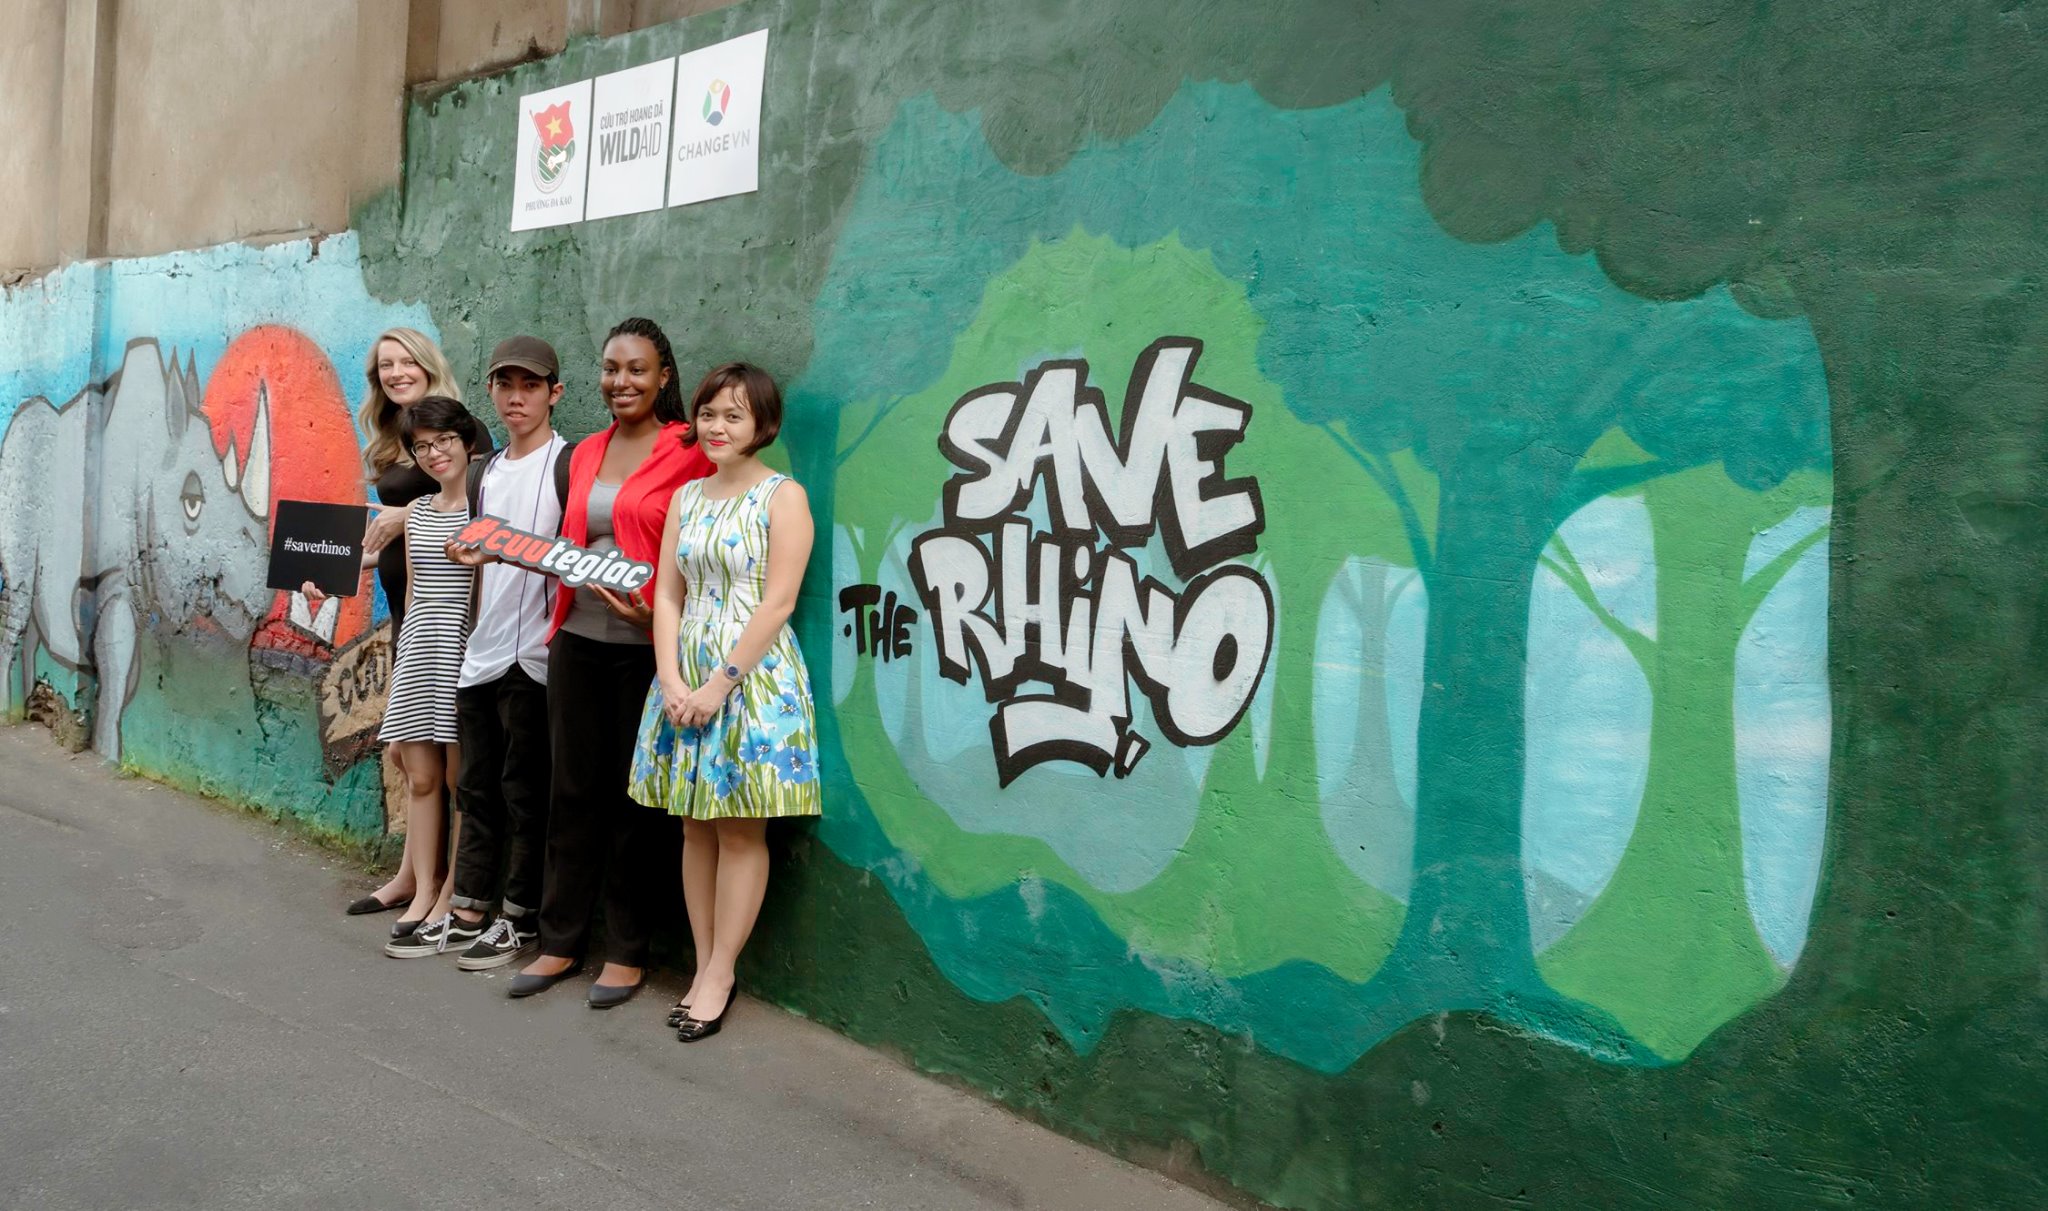 Chau Nhi (second from the left) with the wall drawing team working to protect rhinos in Vietnam.